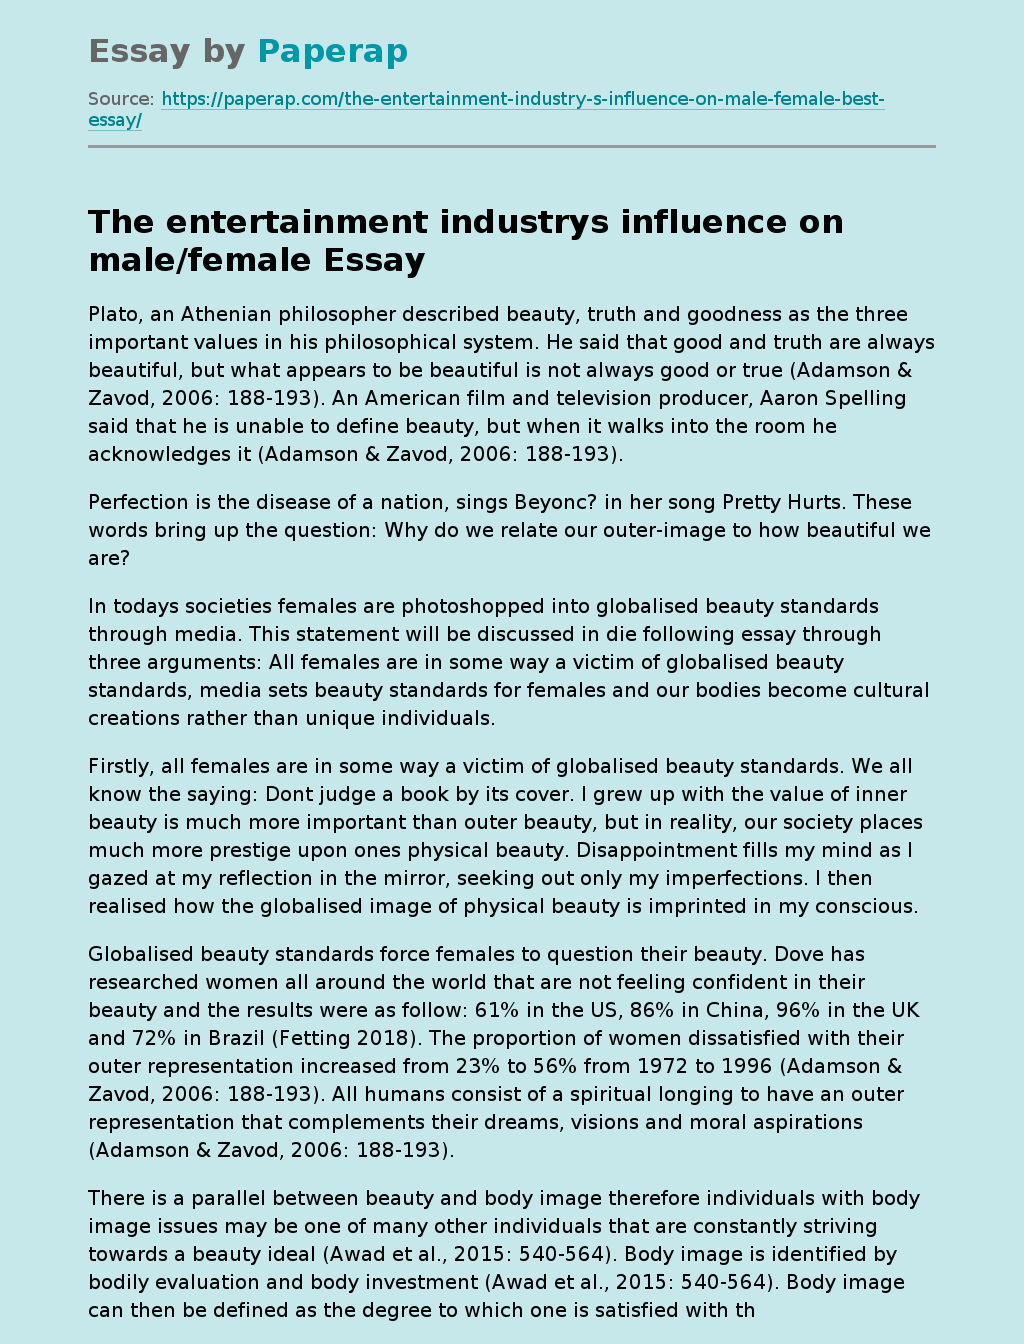 The Entertainment Industrys Influence on Male/Female